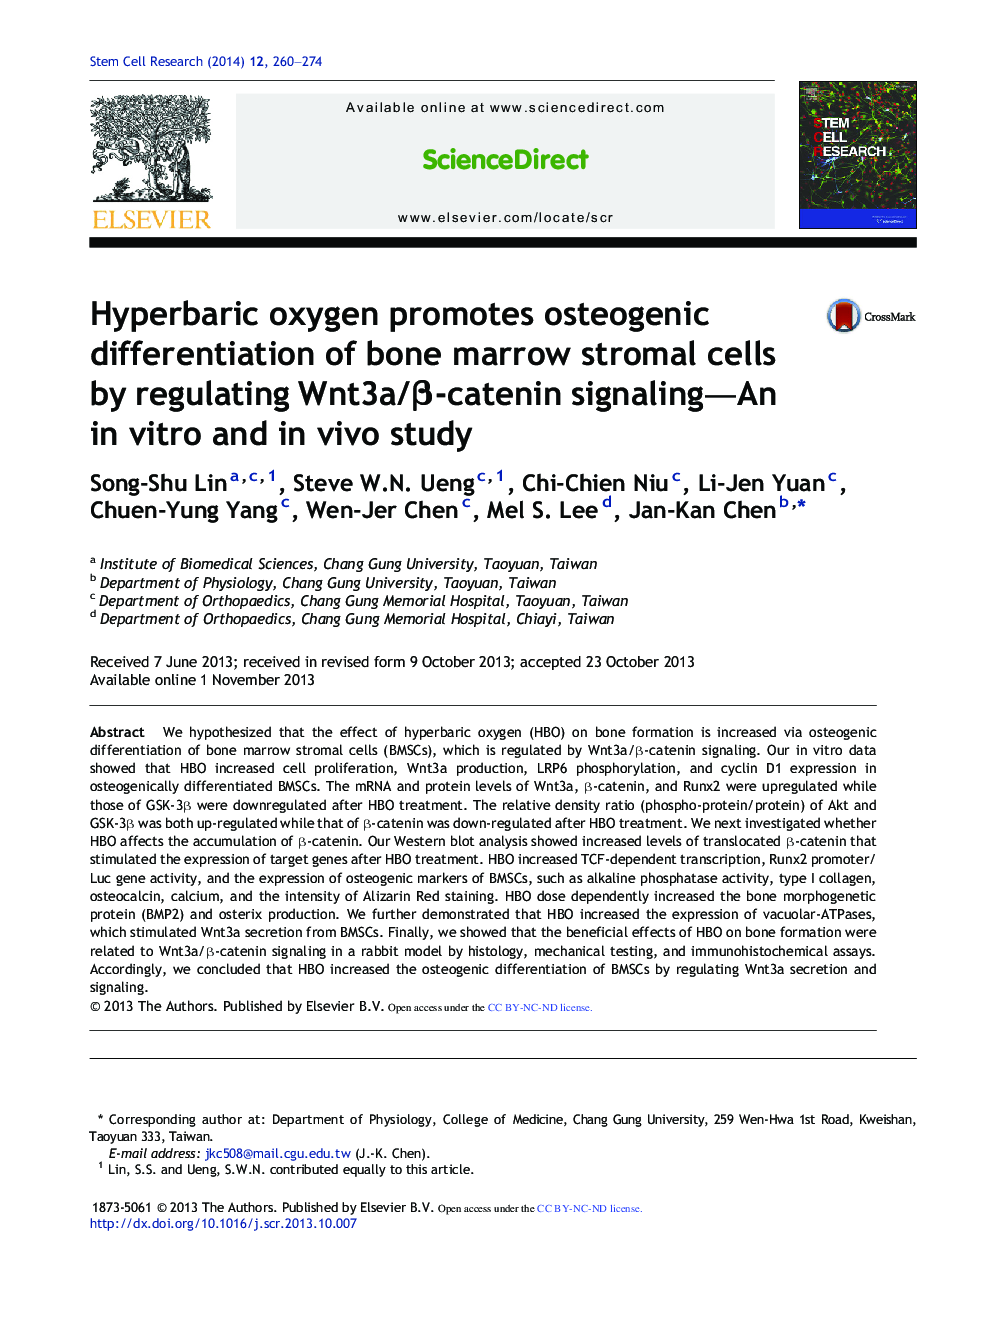 Hyperbaric oxygen promotes osteogenic differentiation of bone marrow stromal cells by regulating Wnt3a/β-catenin signaling—An in vitro and in vivo study